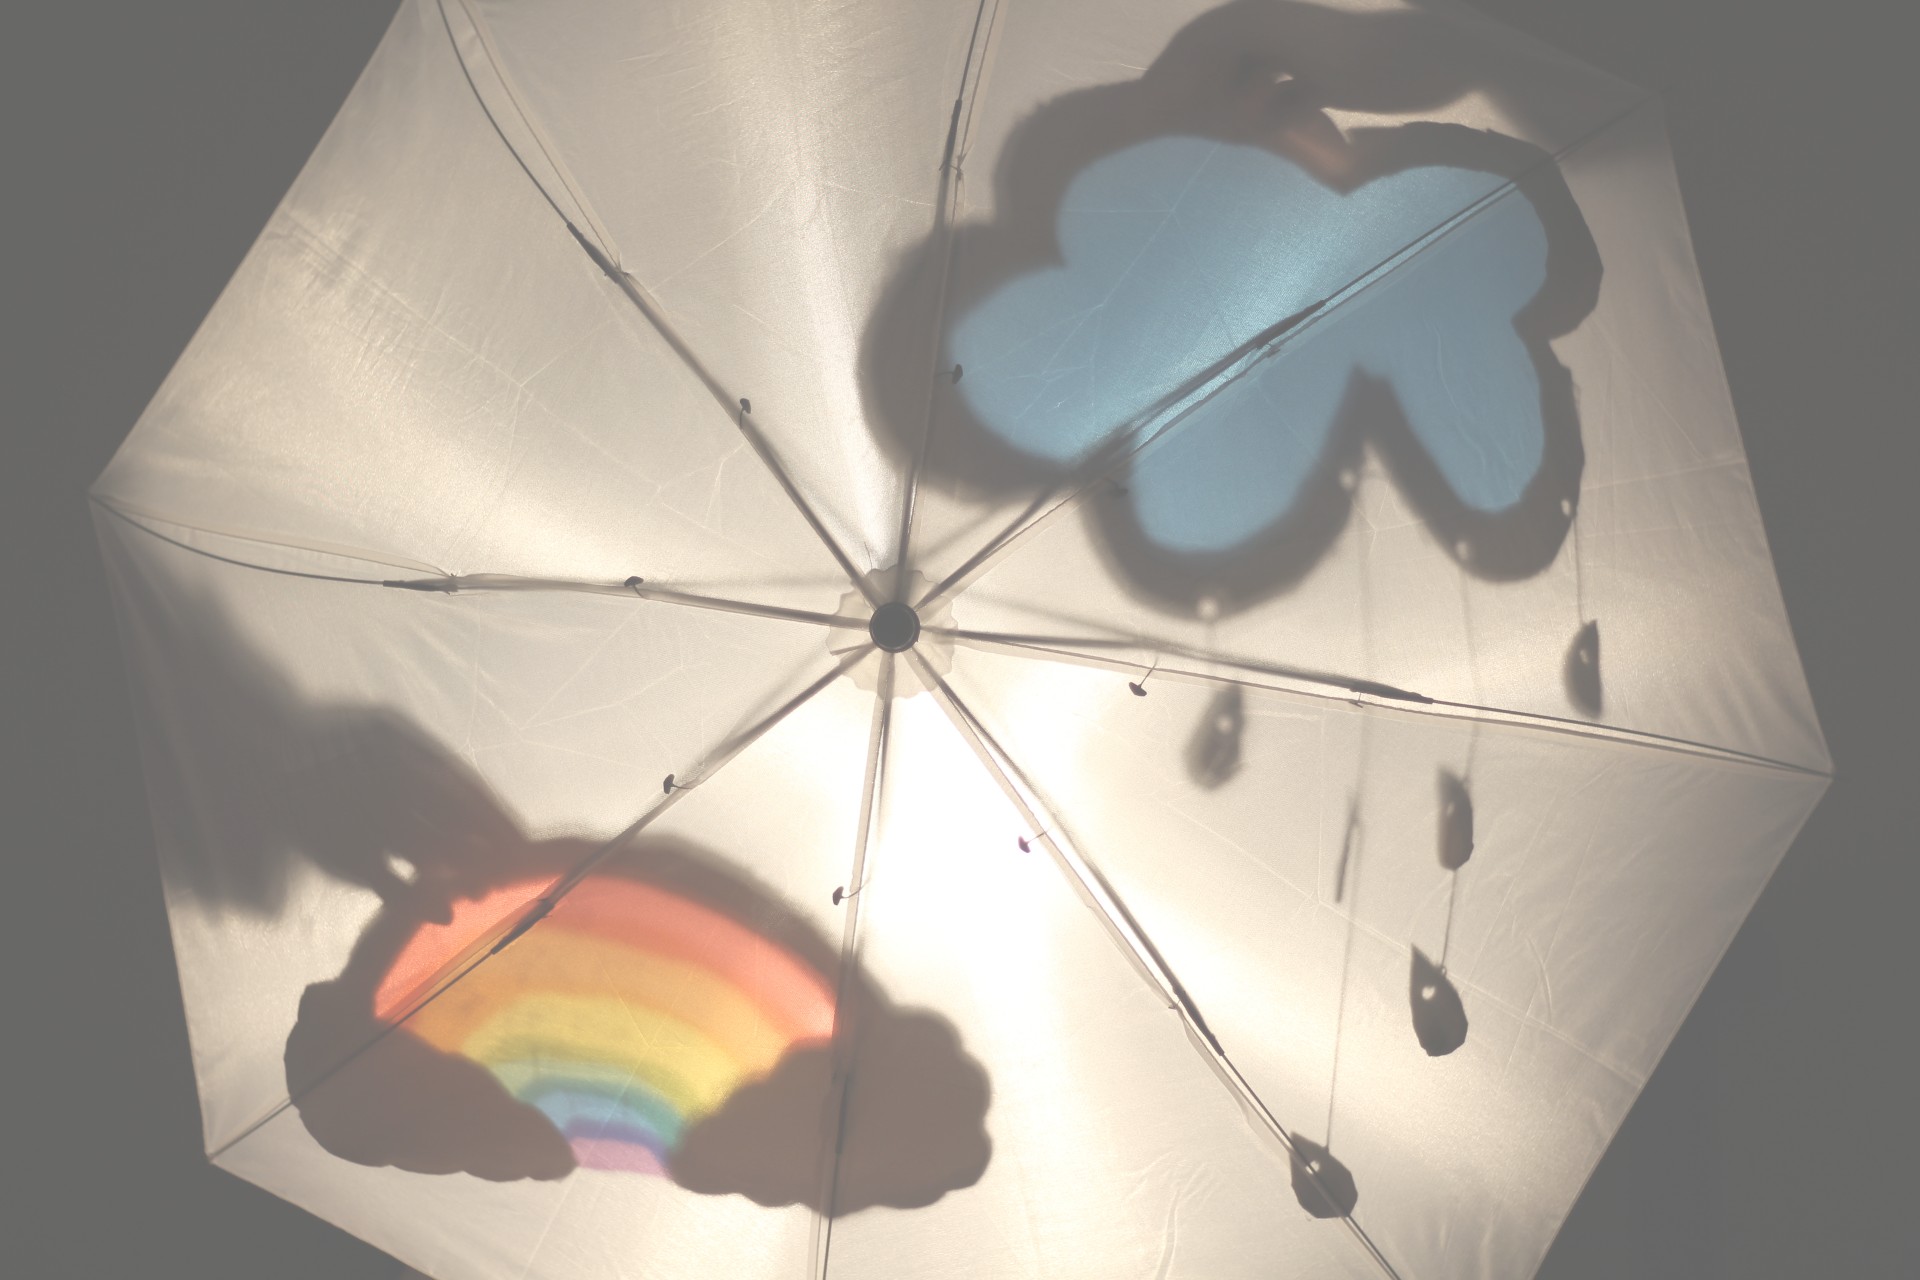 An umbrella with a rainbow and cloud design.